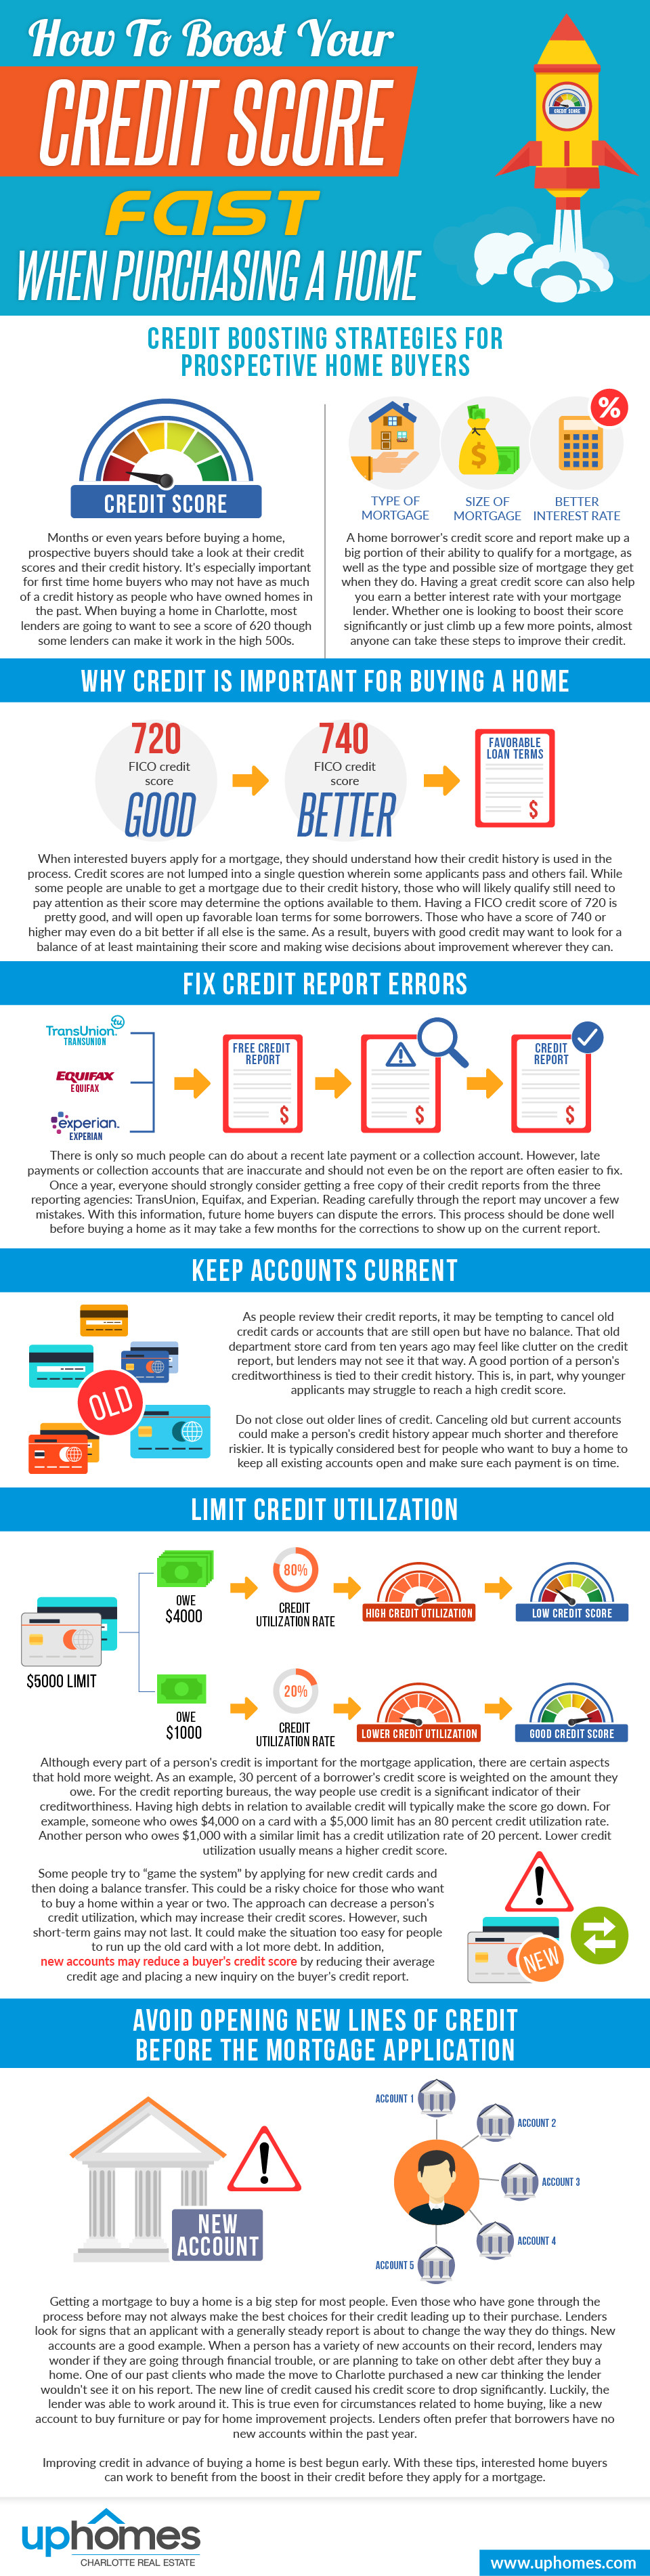 How To Boost Your Credit Score FAST When Buying a Home